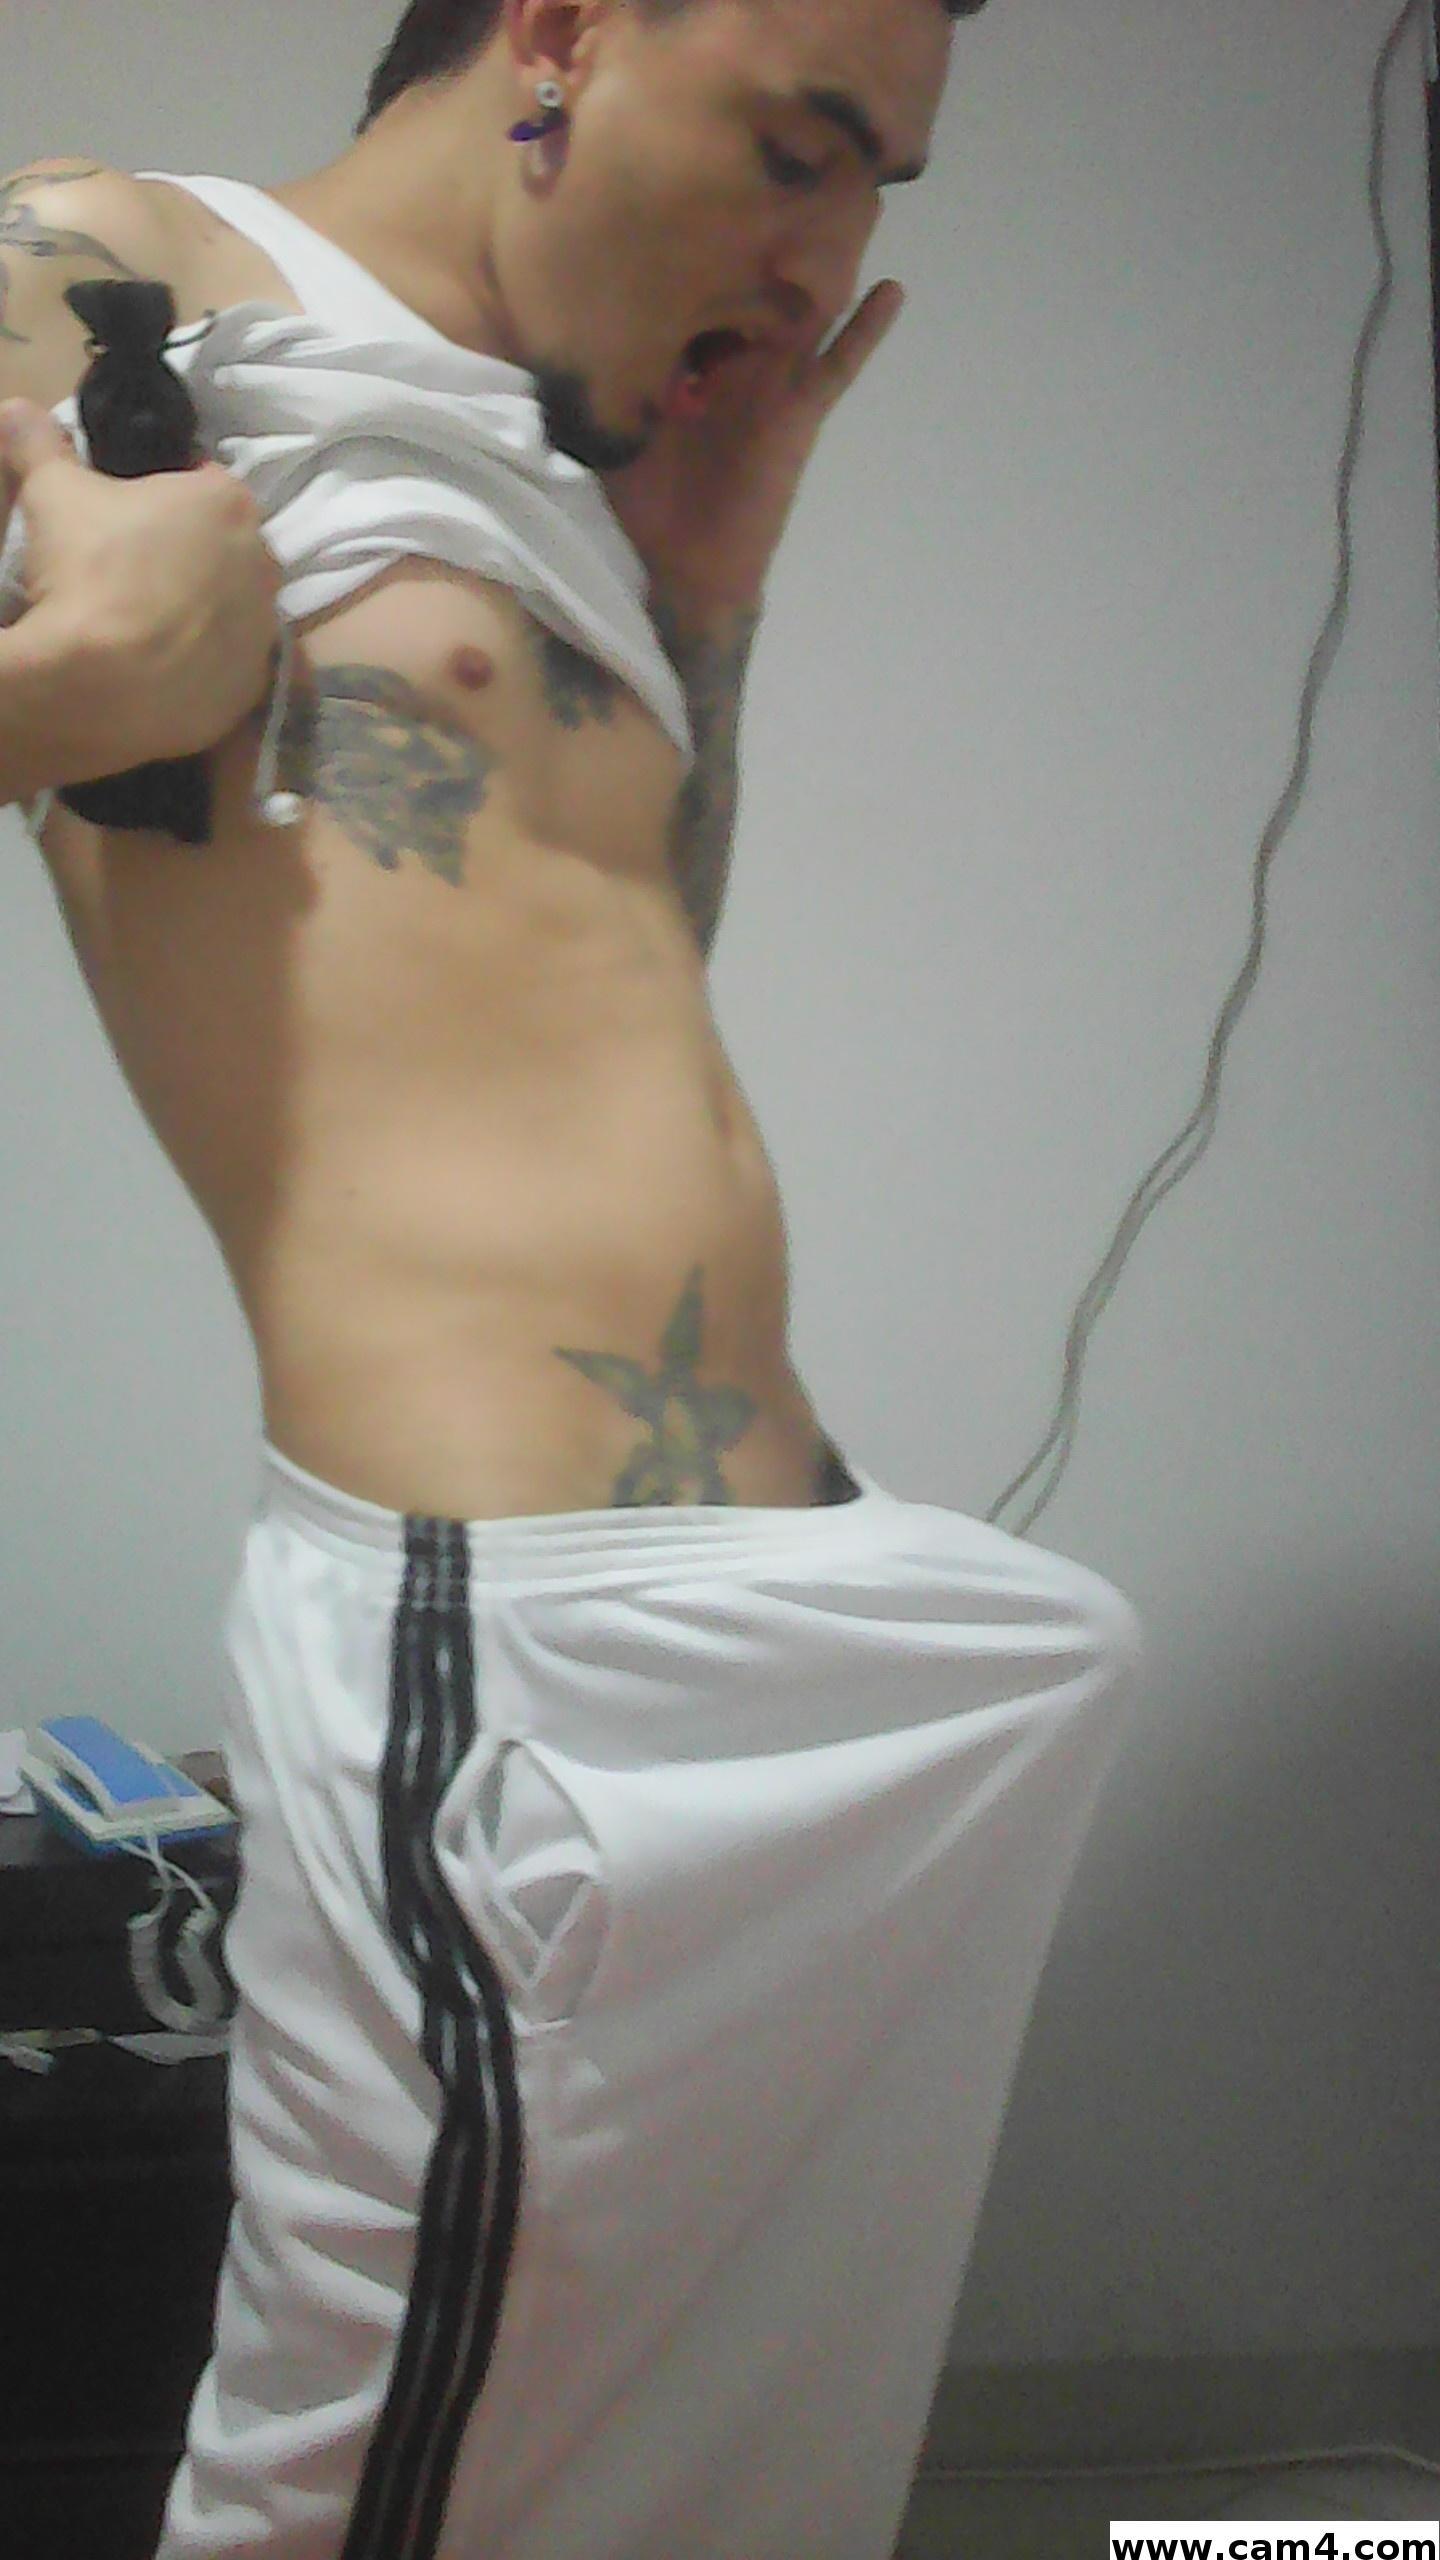 lustful_lord live cam on Cam4